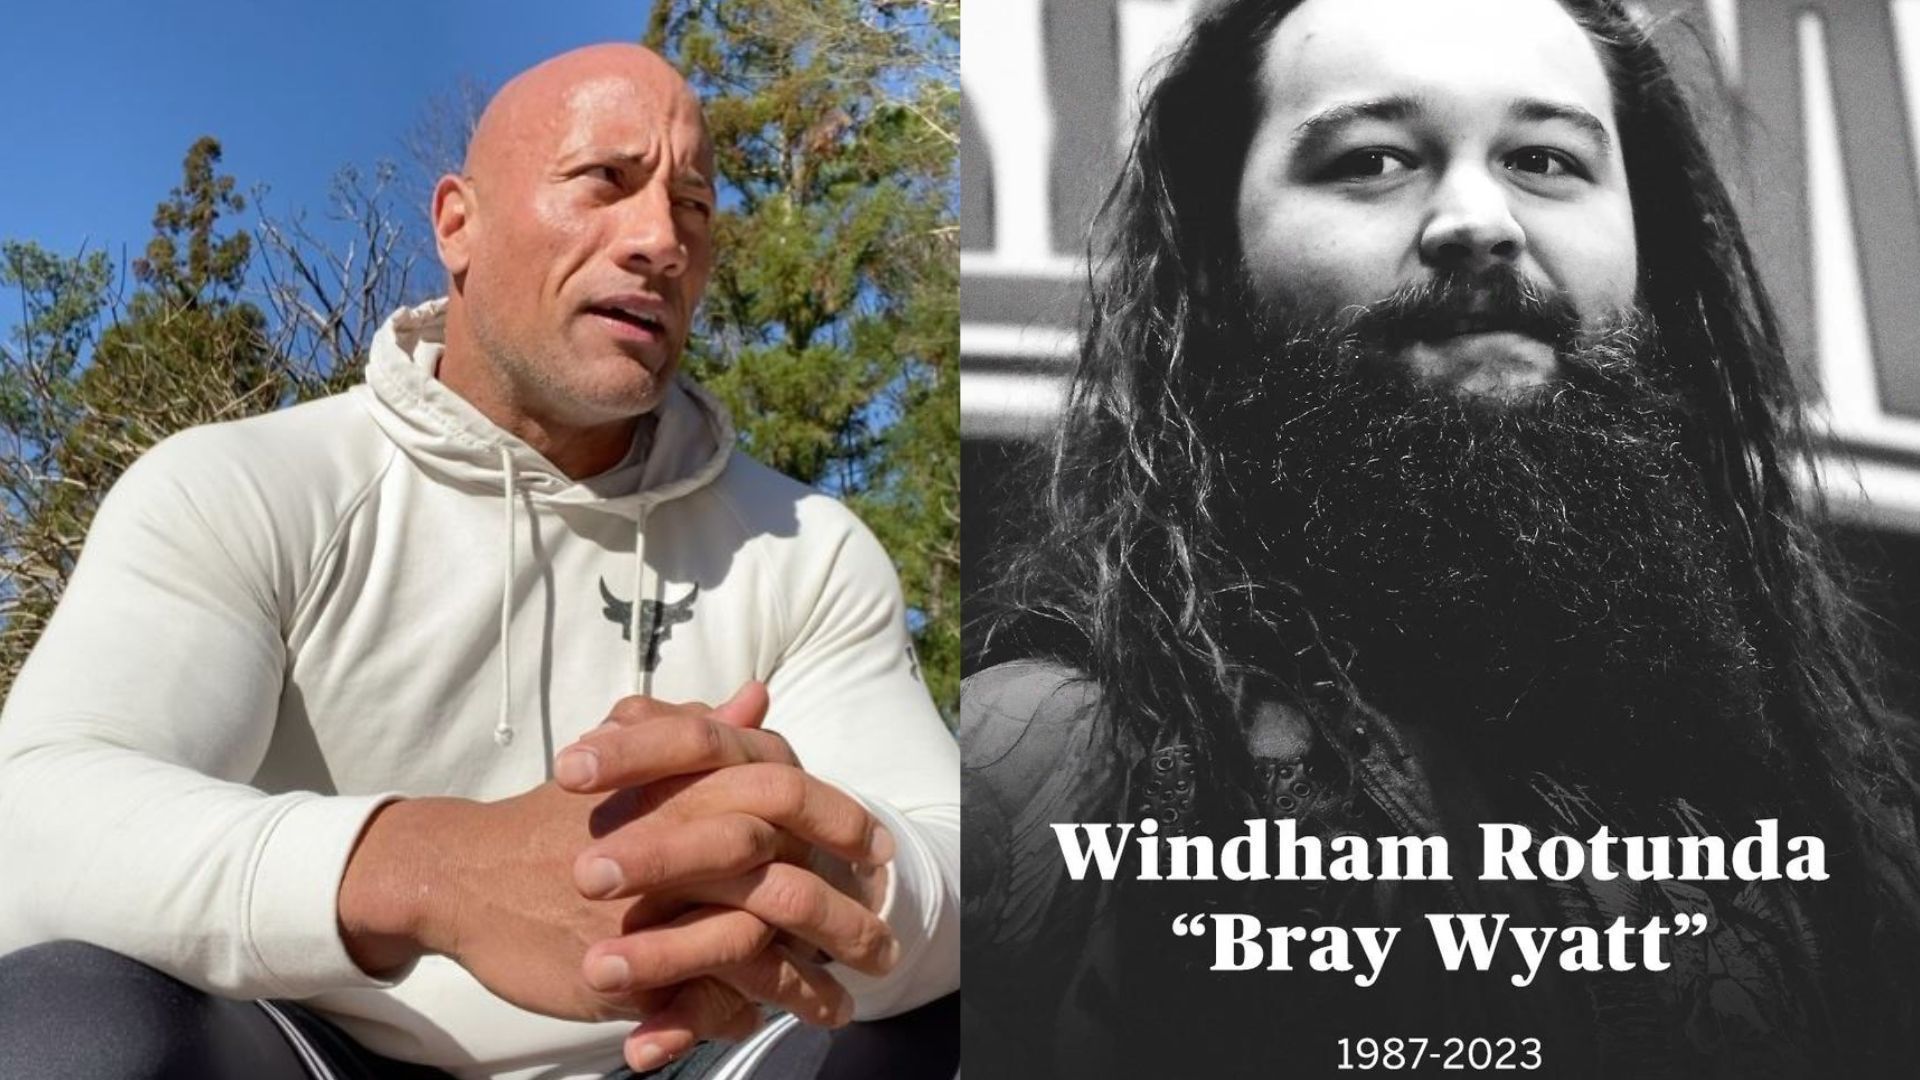 The Rock shared the ring with Bray Wyatt at WrestleMania 32